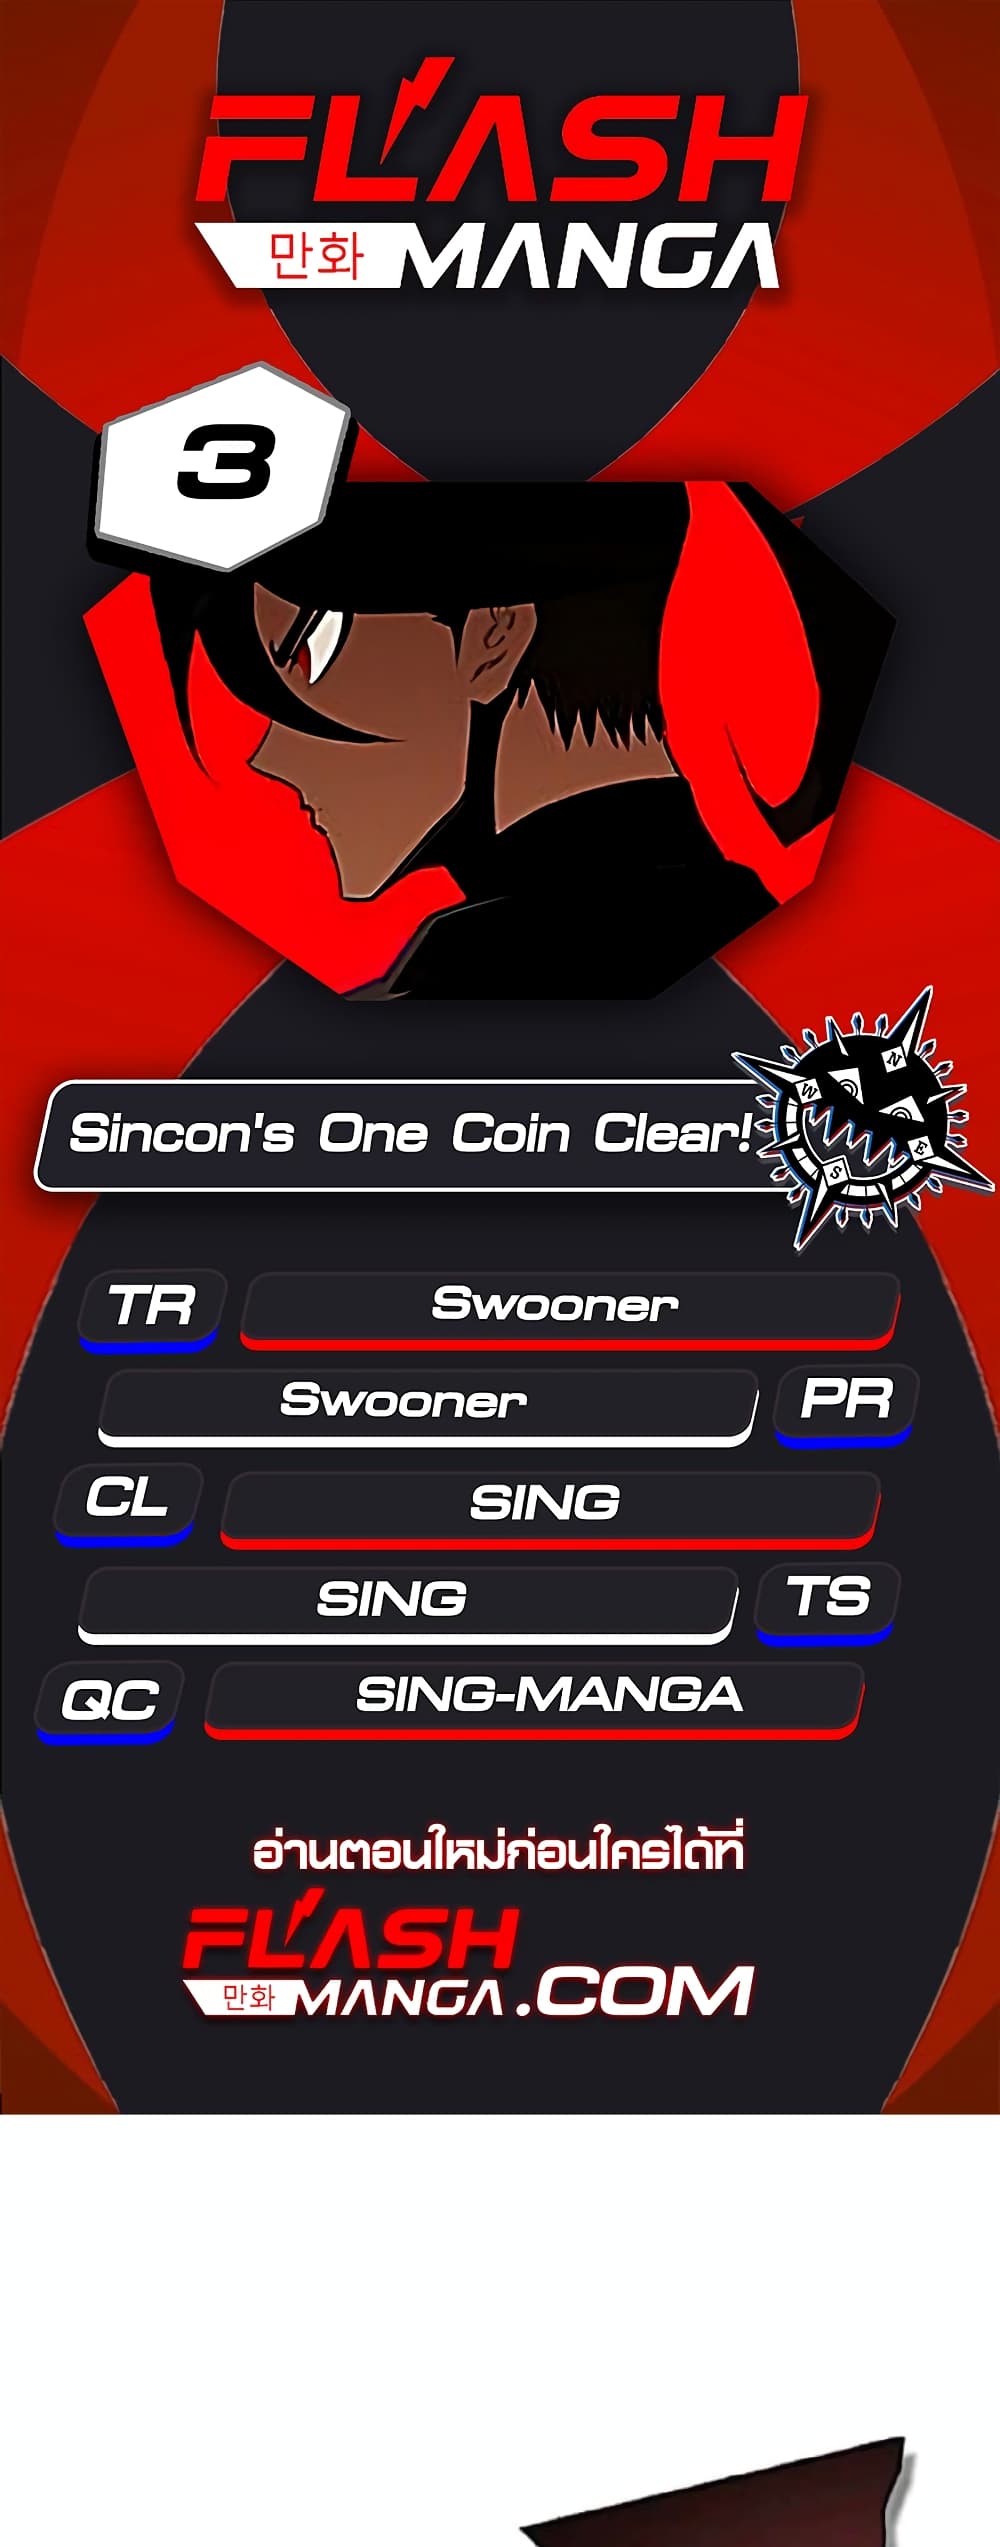 Sincon's One Coin Clear 3-3